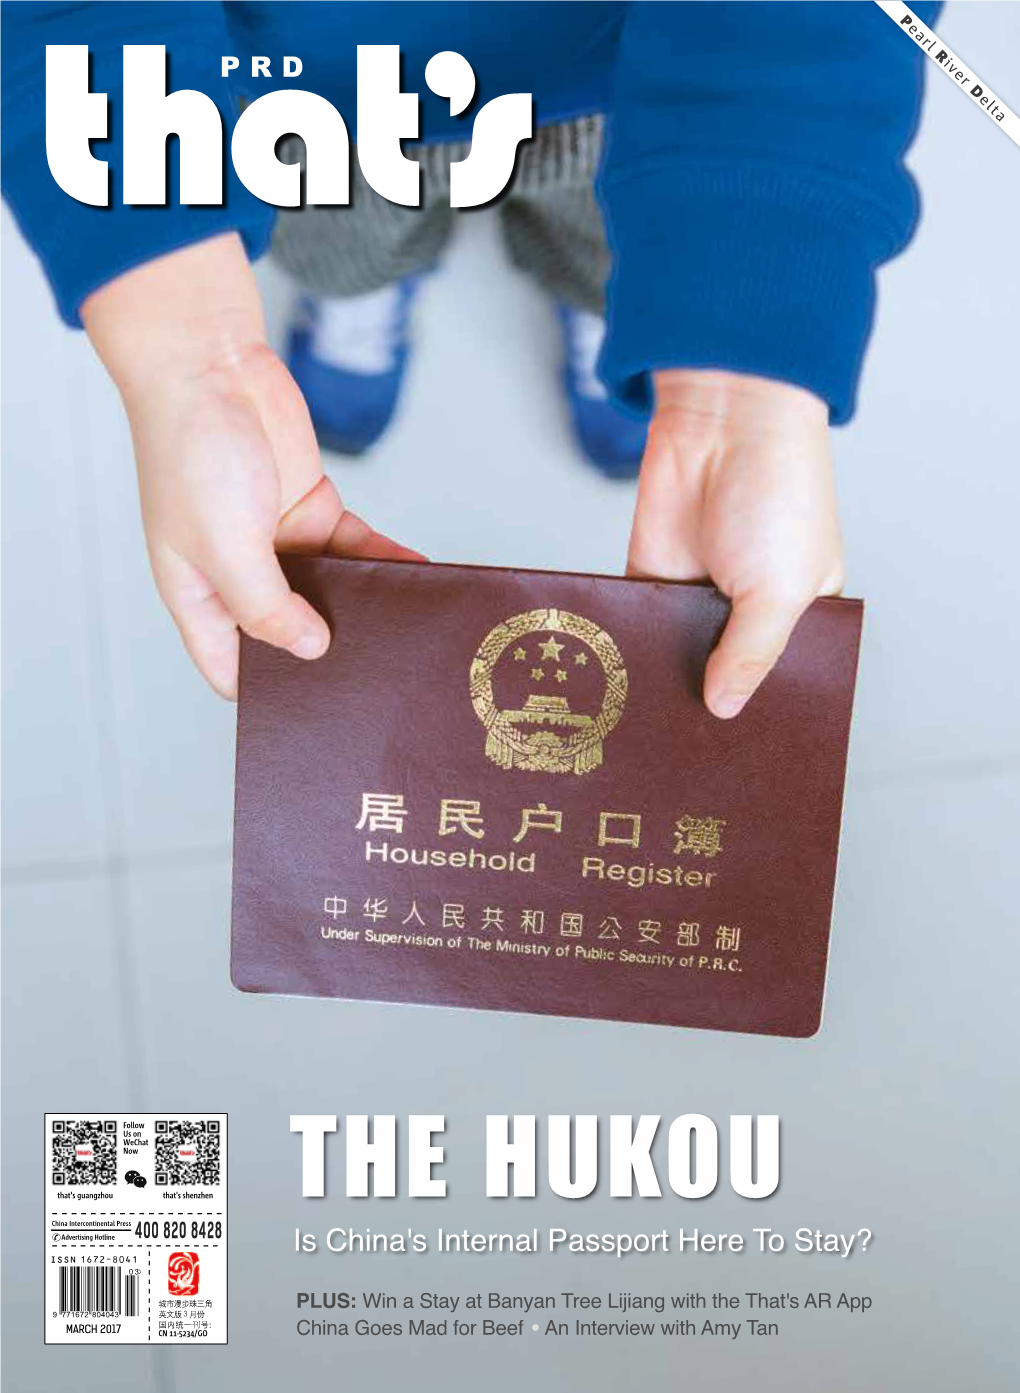 THE HUKOU Advertising Hotline Is China's Internal Passport Here to Stay?